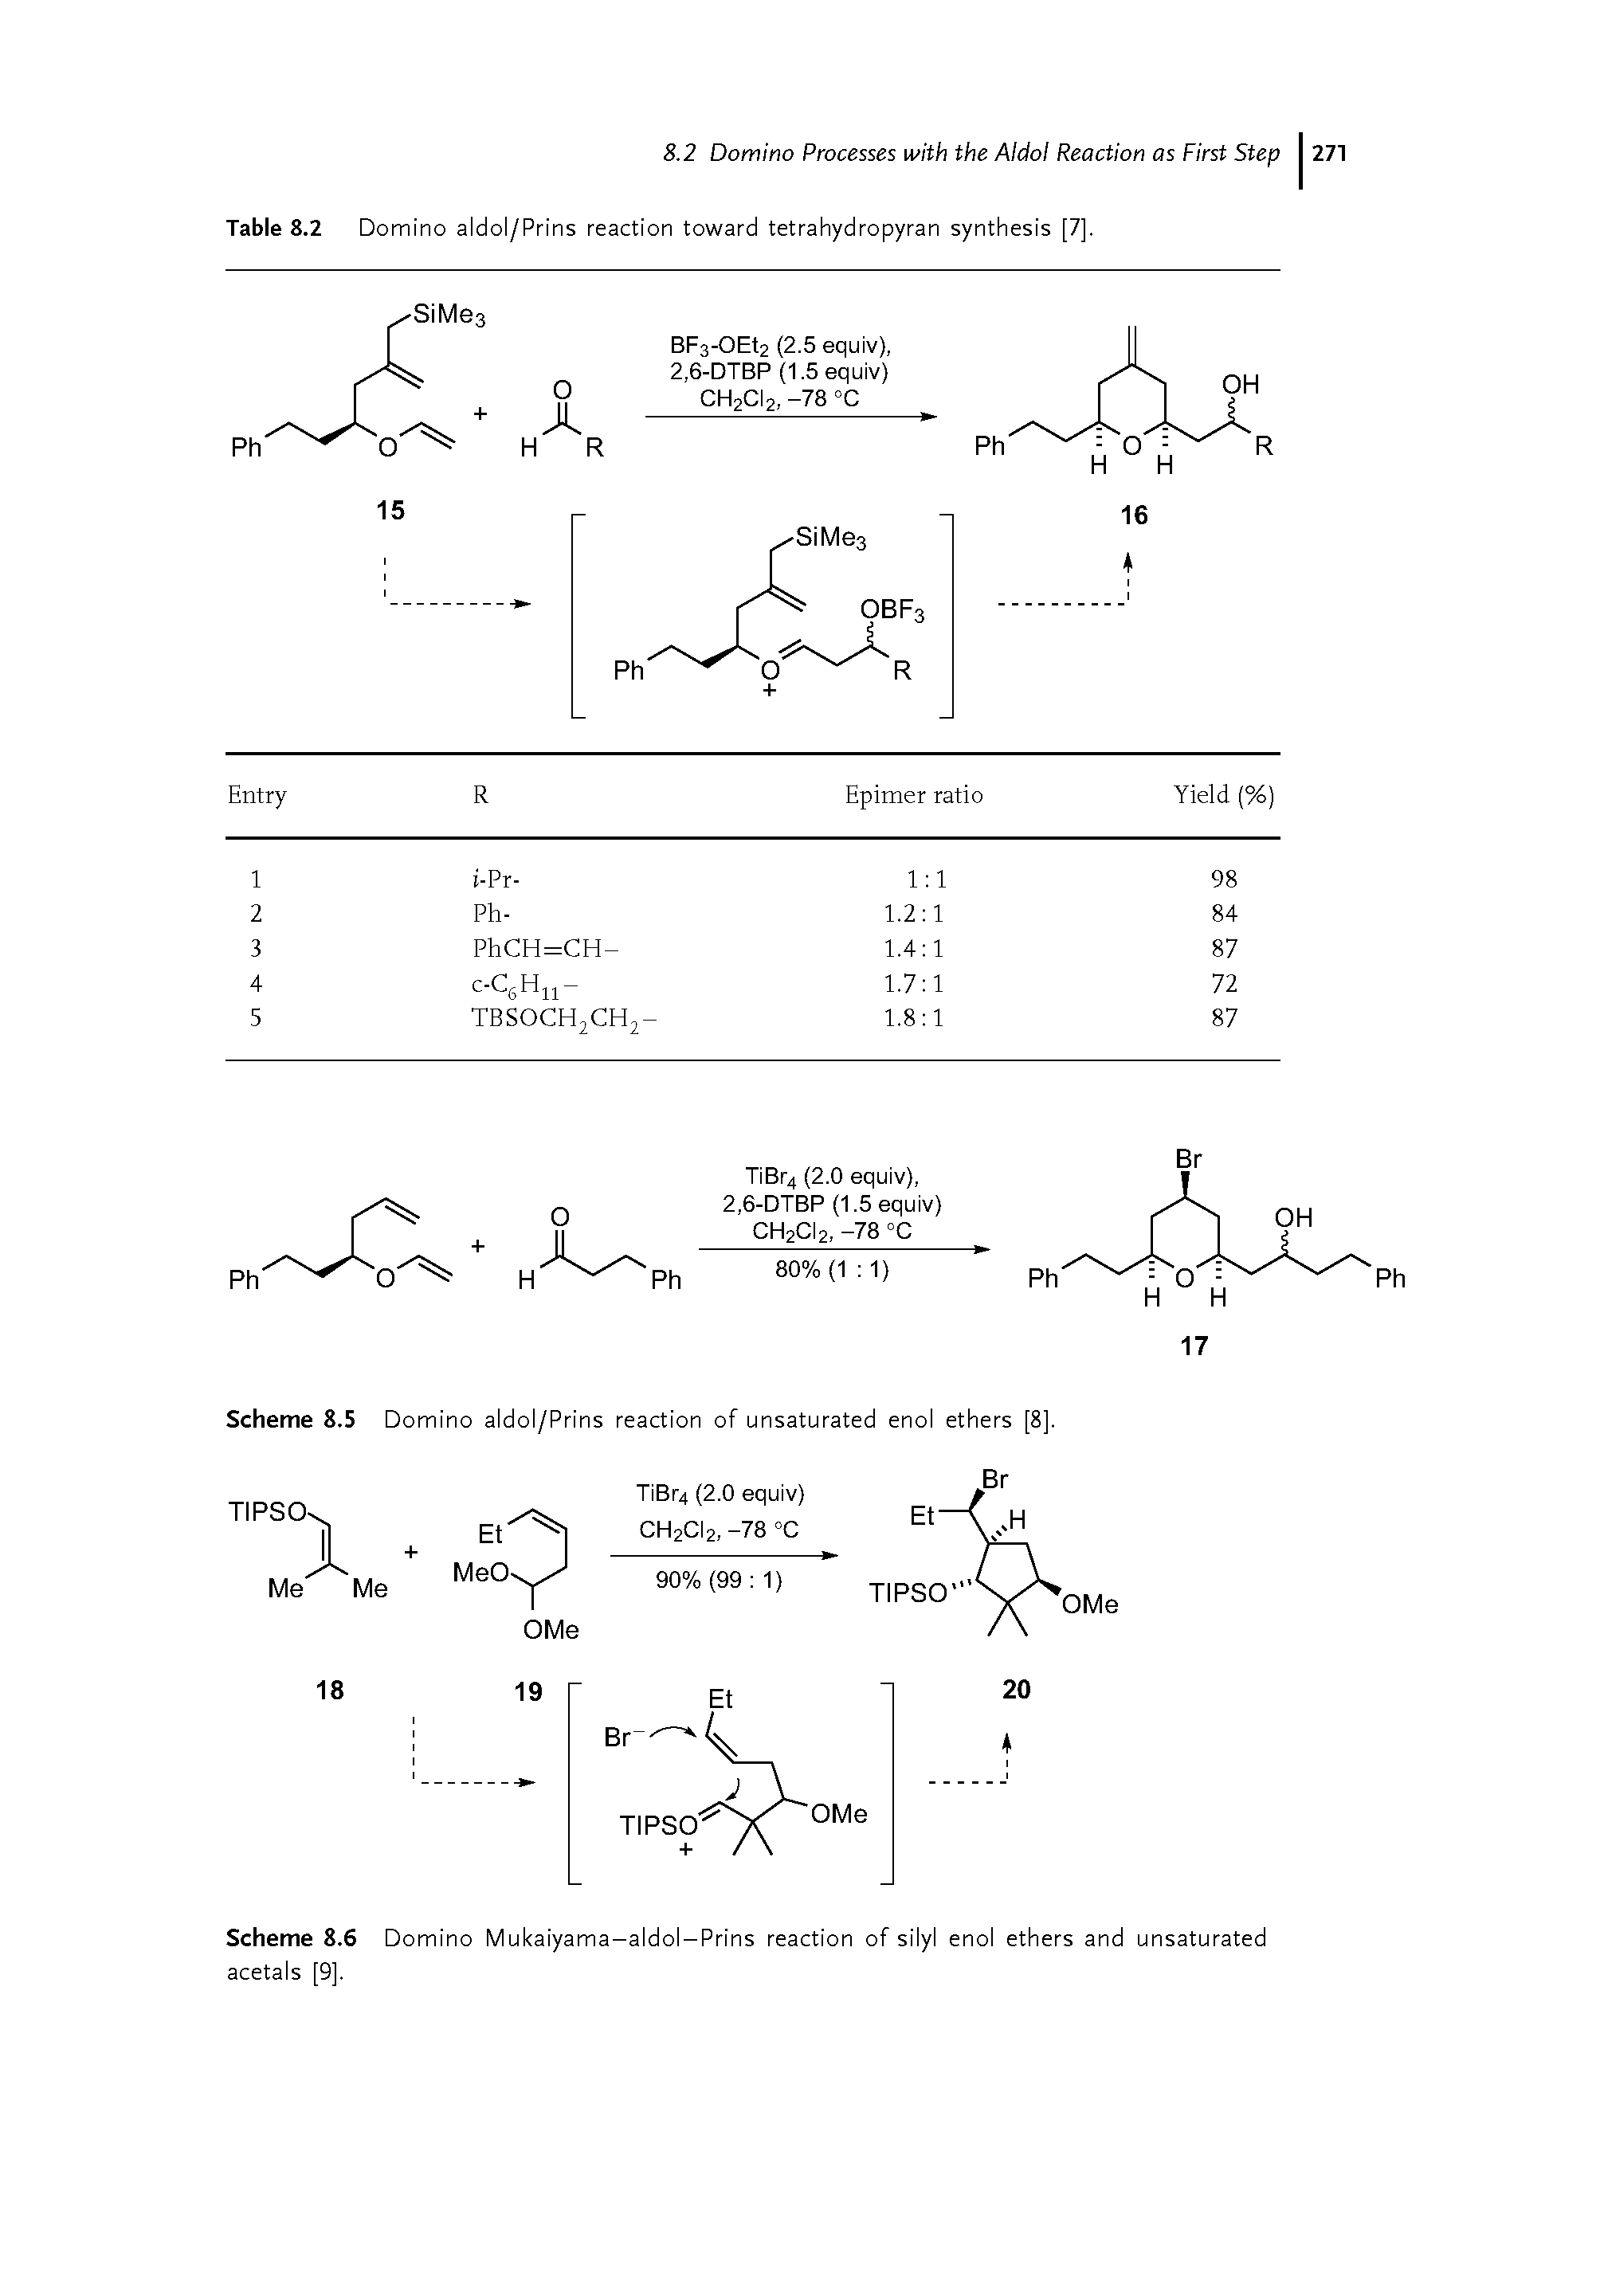 Scheme 8.6 Domino Mukaiyama-aldol-Prins reaction of silyl enol ethers and unsaturated acetals [9].